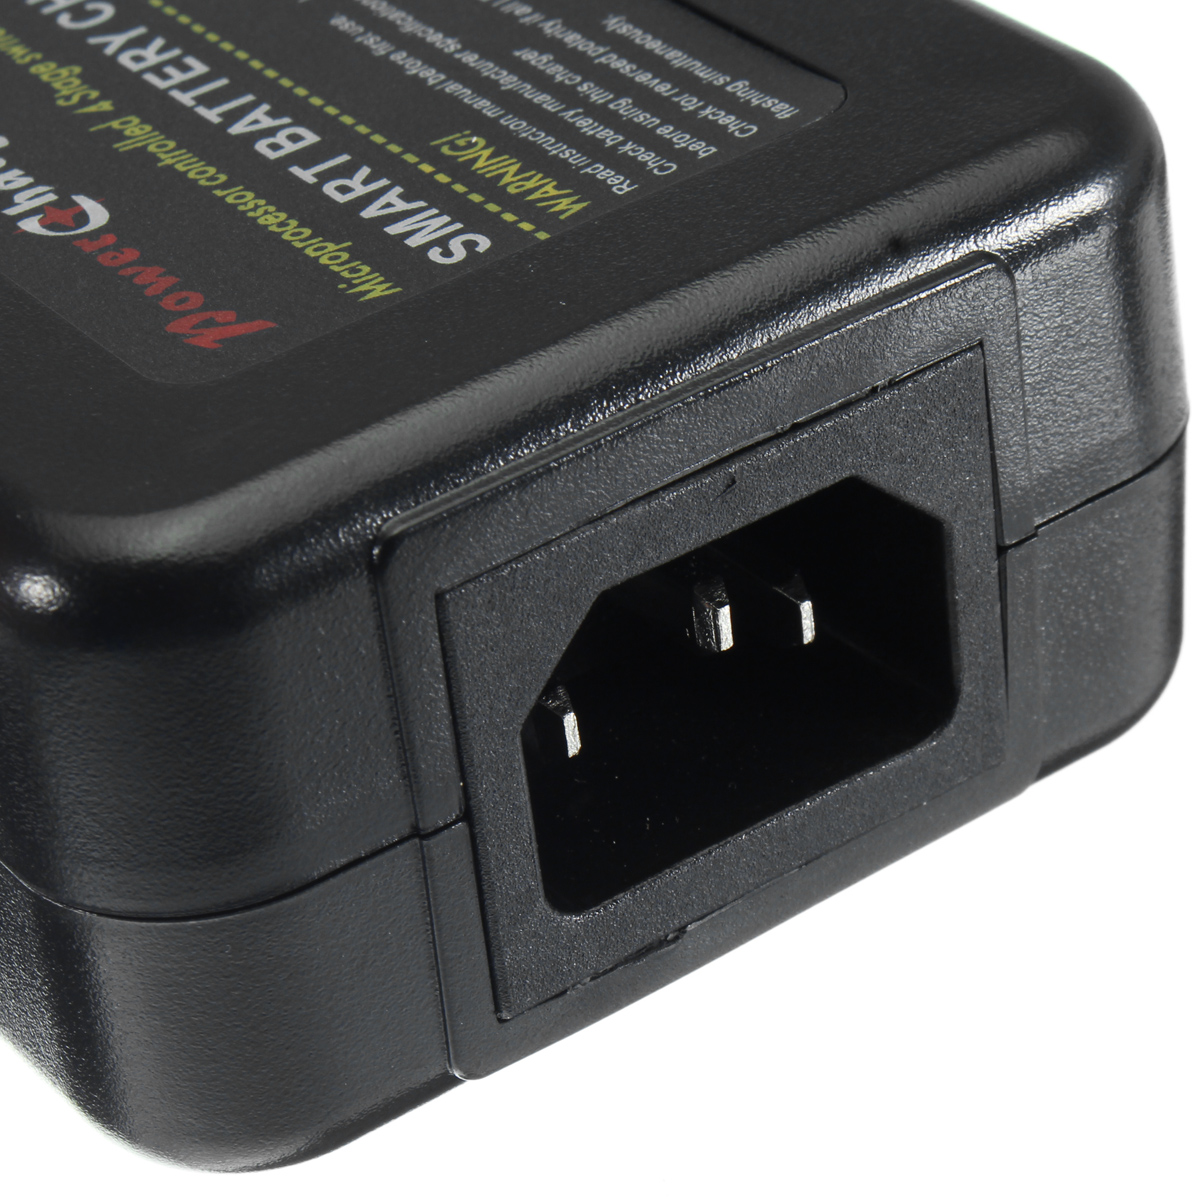 128V-4S-Lifepo4-Lithium-Golf-Battery-Charger-4-Amp-55mm-Dc-Jack-Connector-Plug-1414392